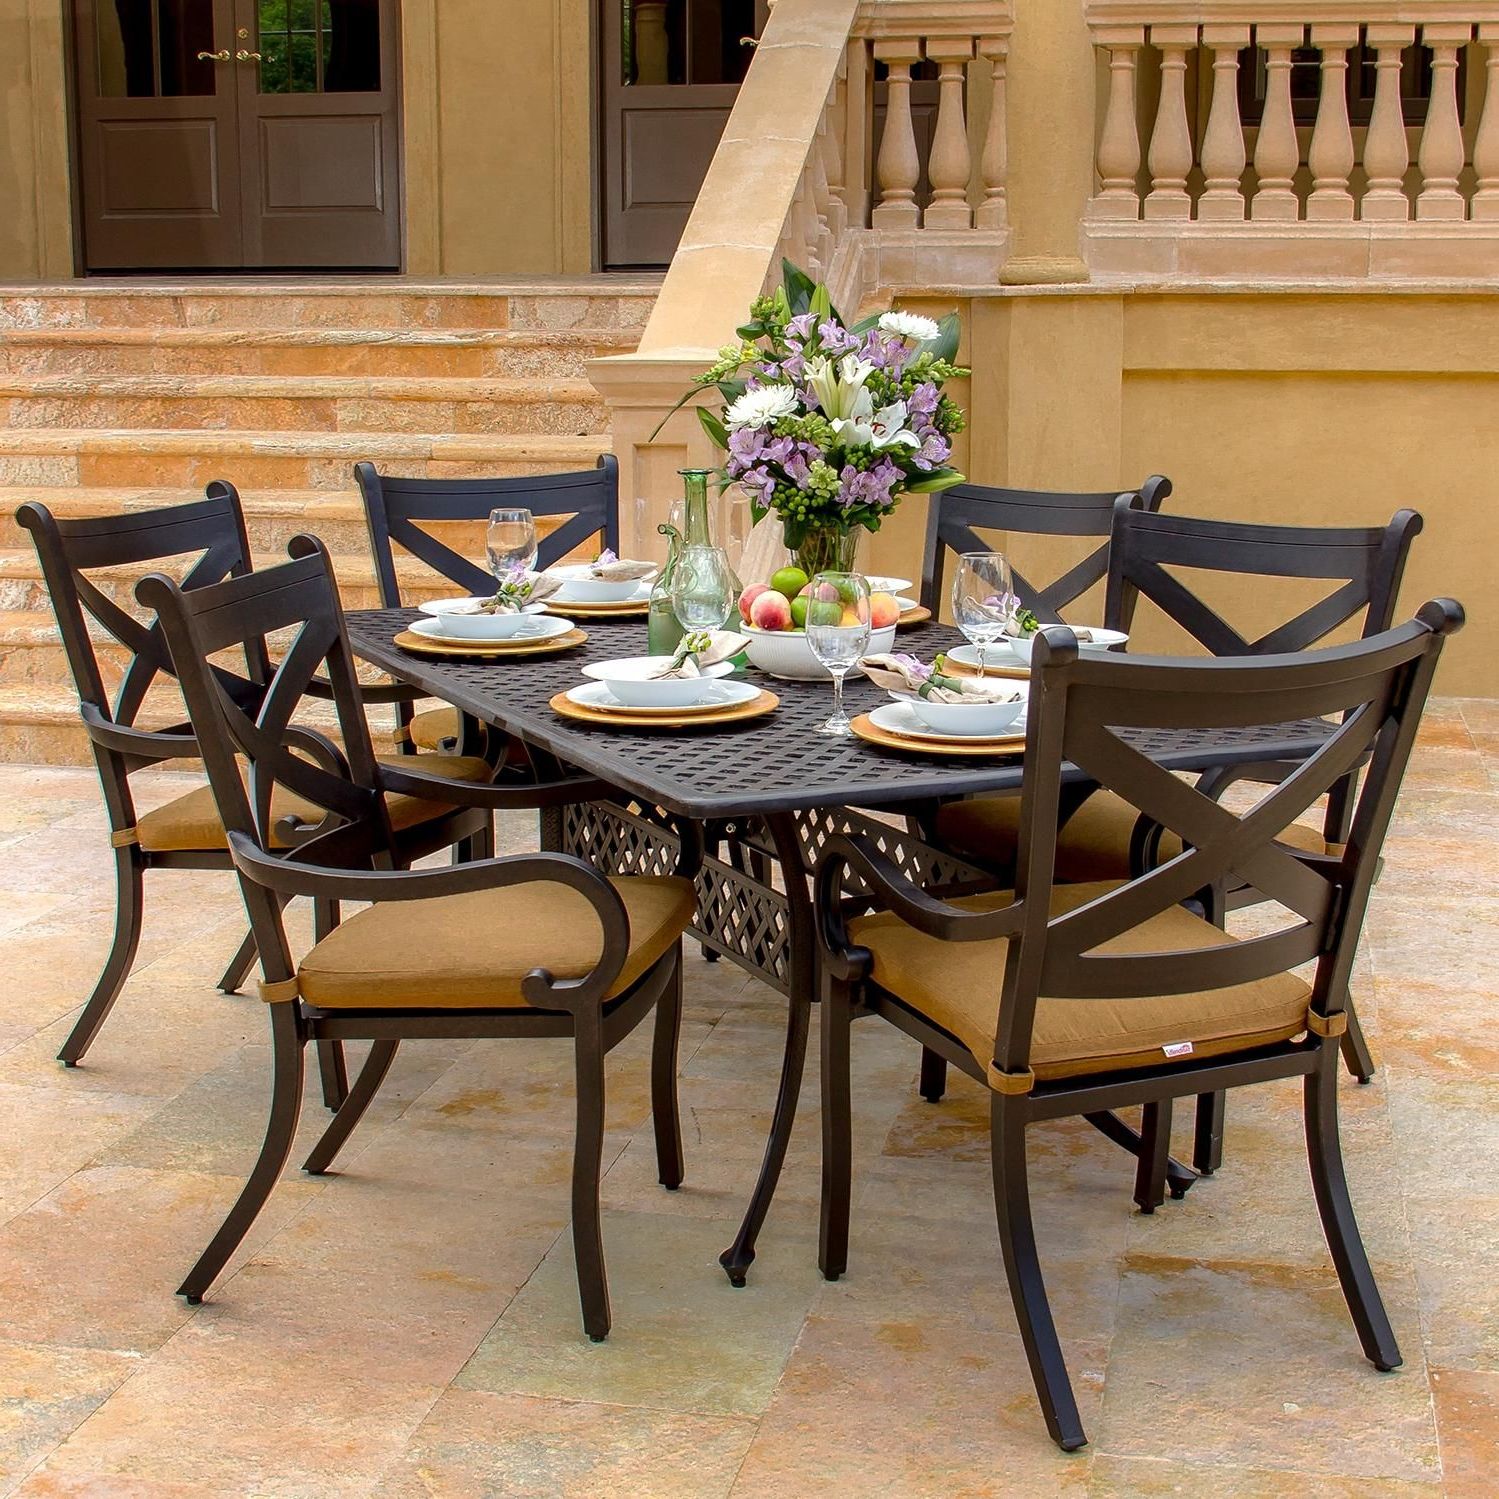 Patio Dining Set Throughout Well Known 7 Piece Rectangular Patio Dining Sets (View 6 of 15)